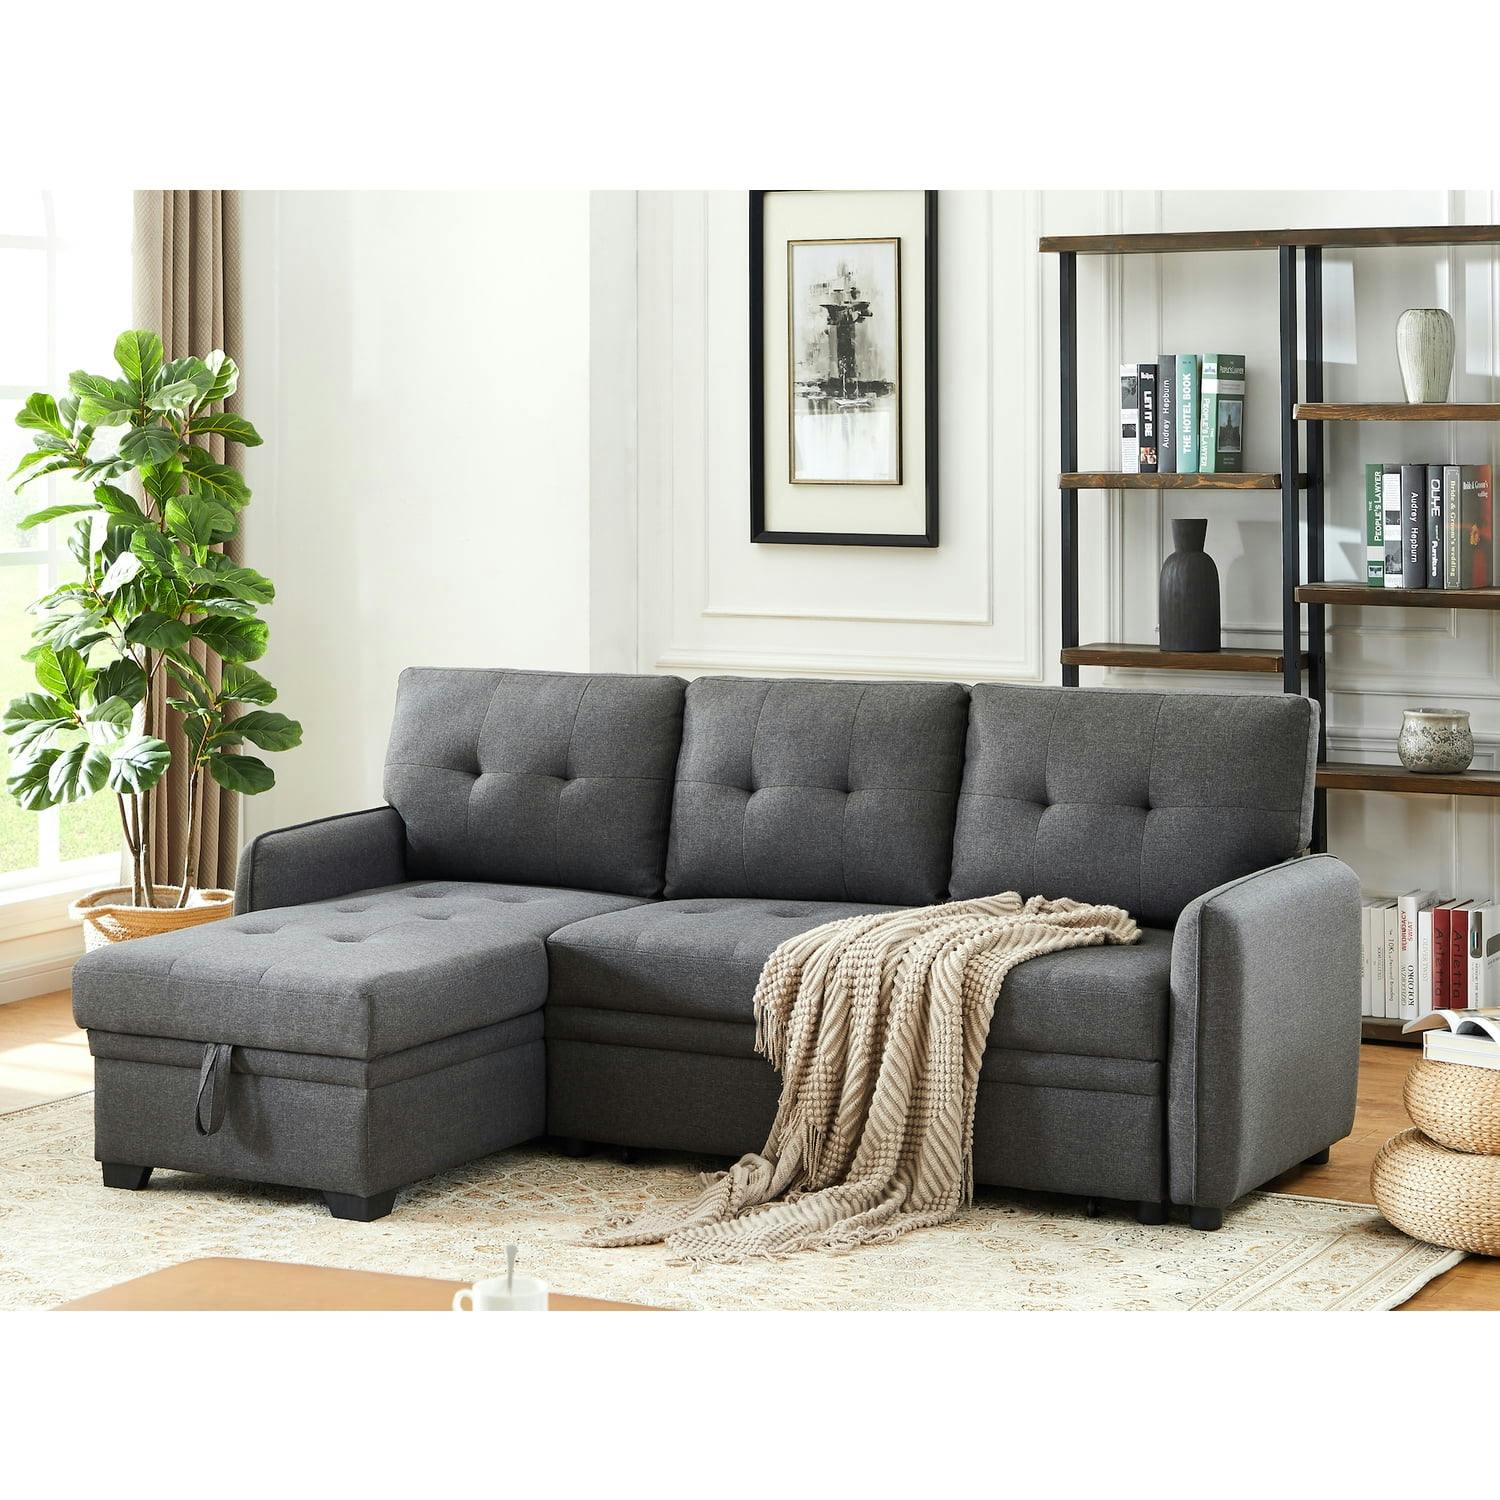 Contemporary Low-Profile Tufted Sectional in Dark Gray Linen